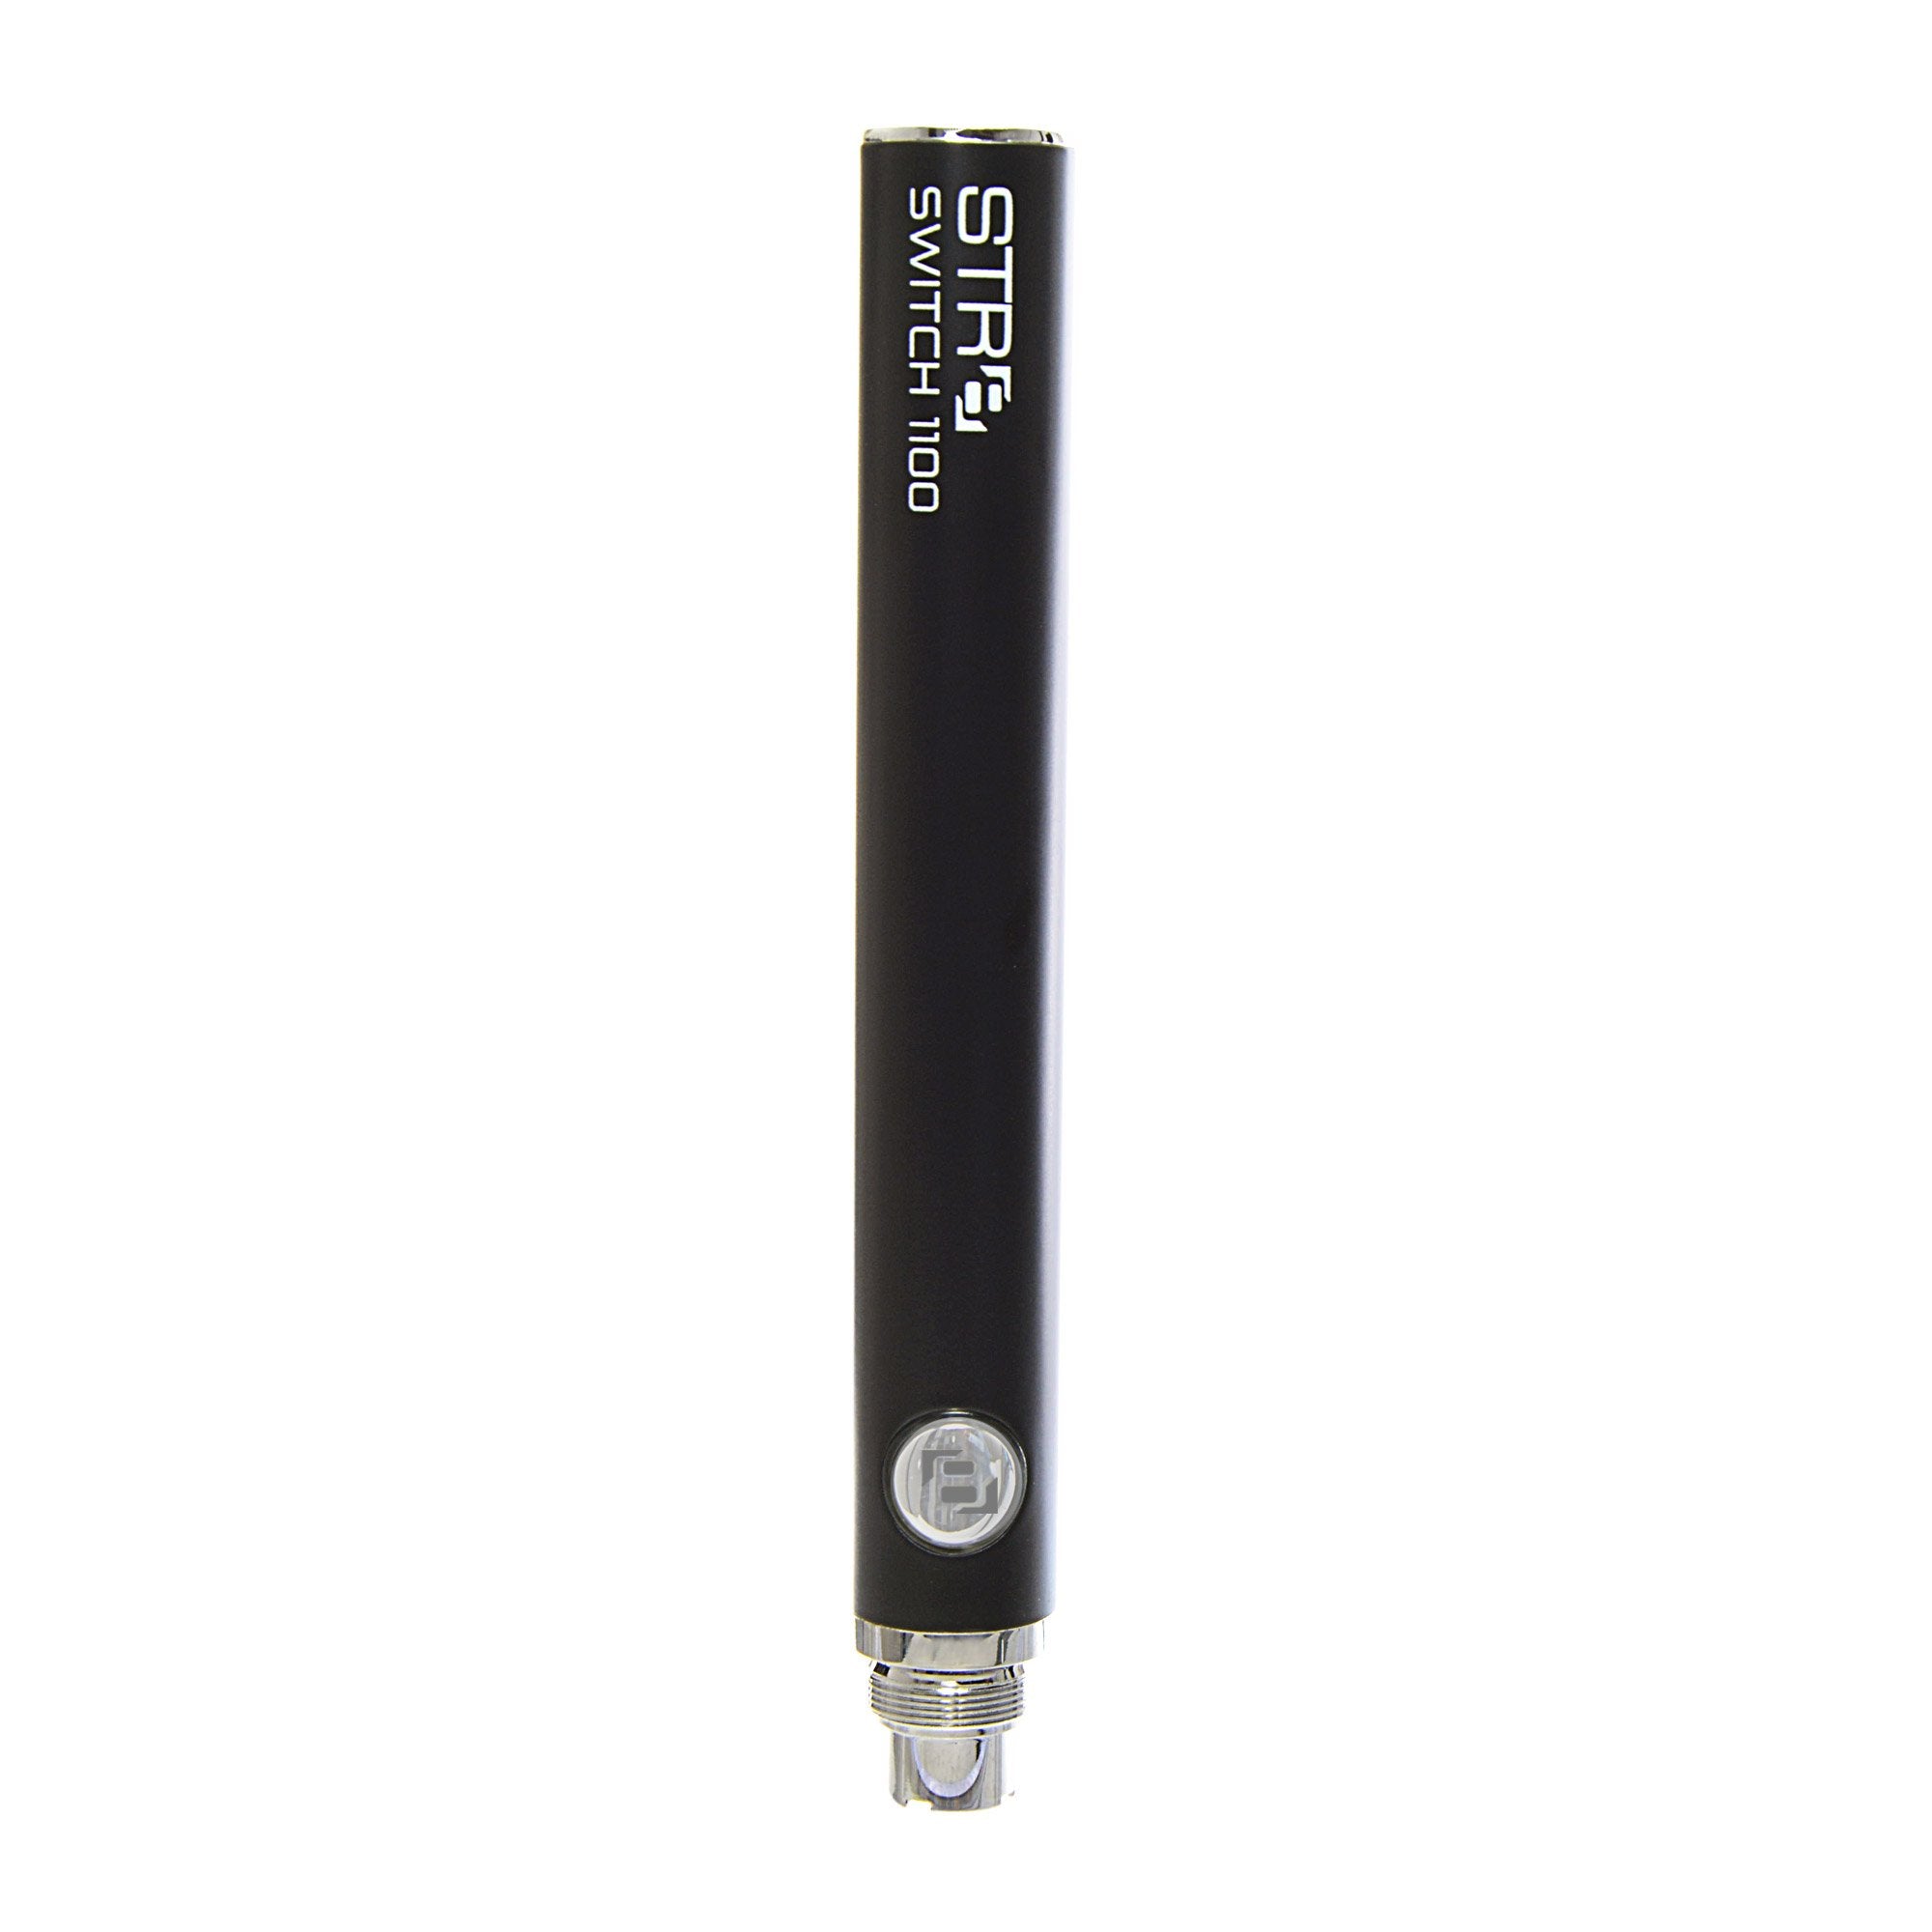 STR8 | 'Retail Display' EVOD Batteries | Switch/Revolve - Mixed - 24 Count - 6